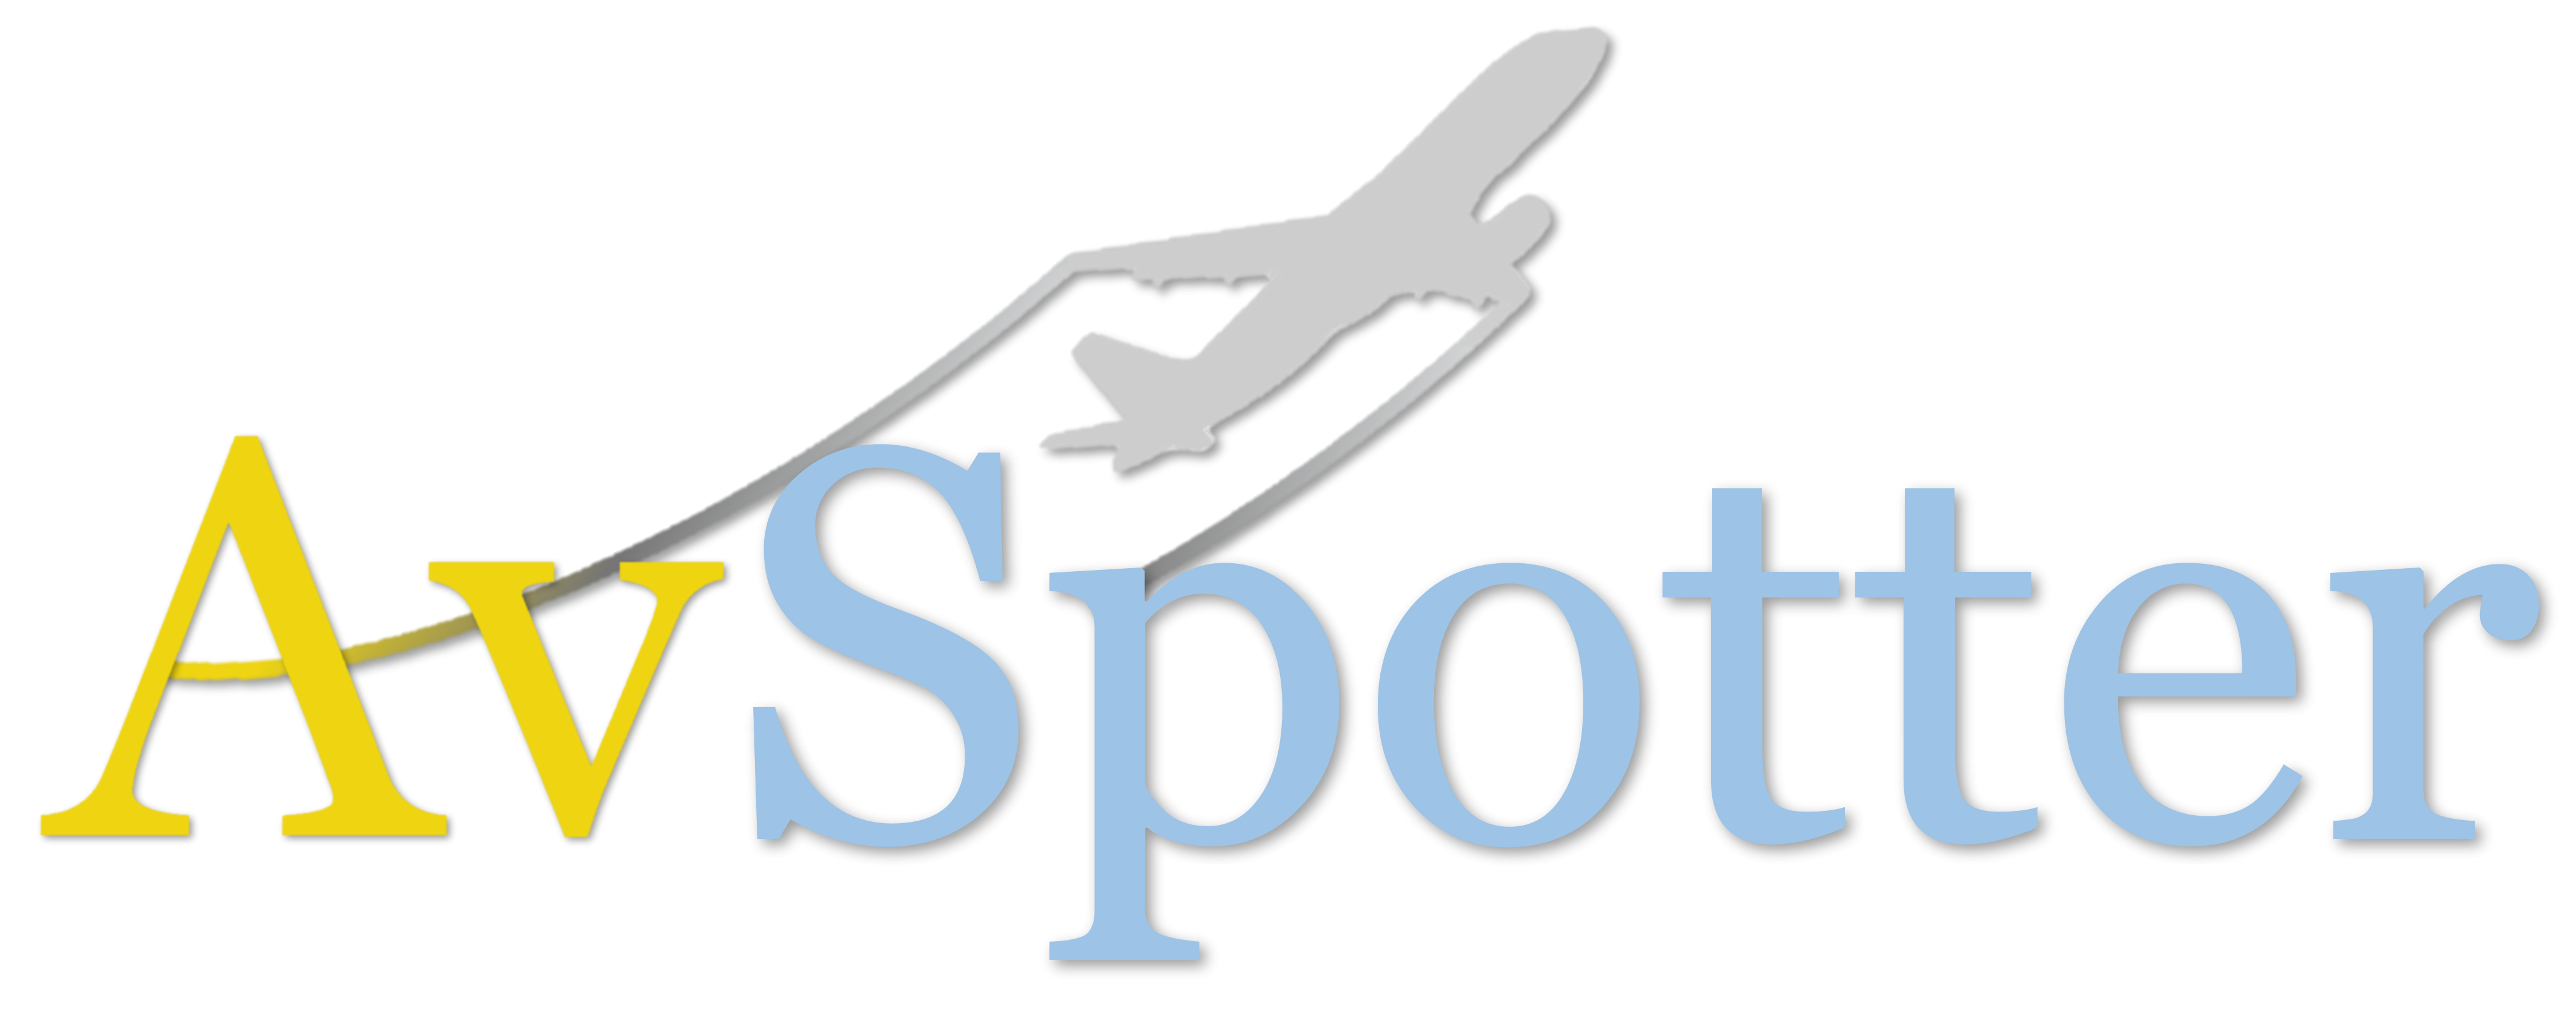  A stylized airplane takes off over the word AvSpotter.